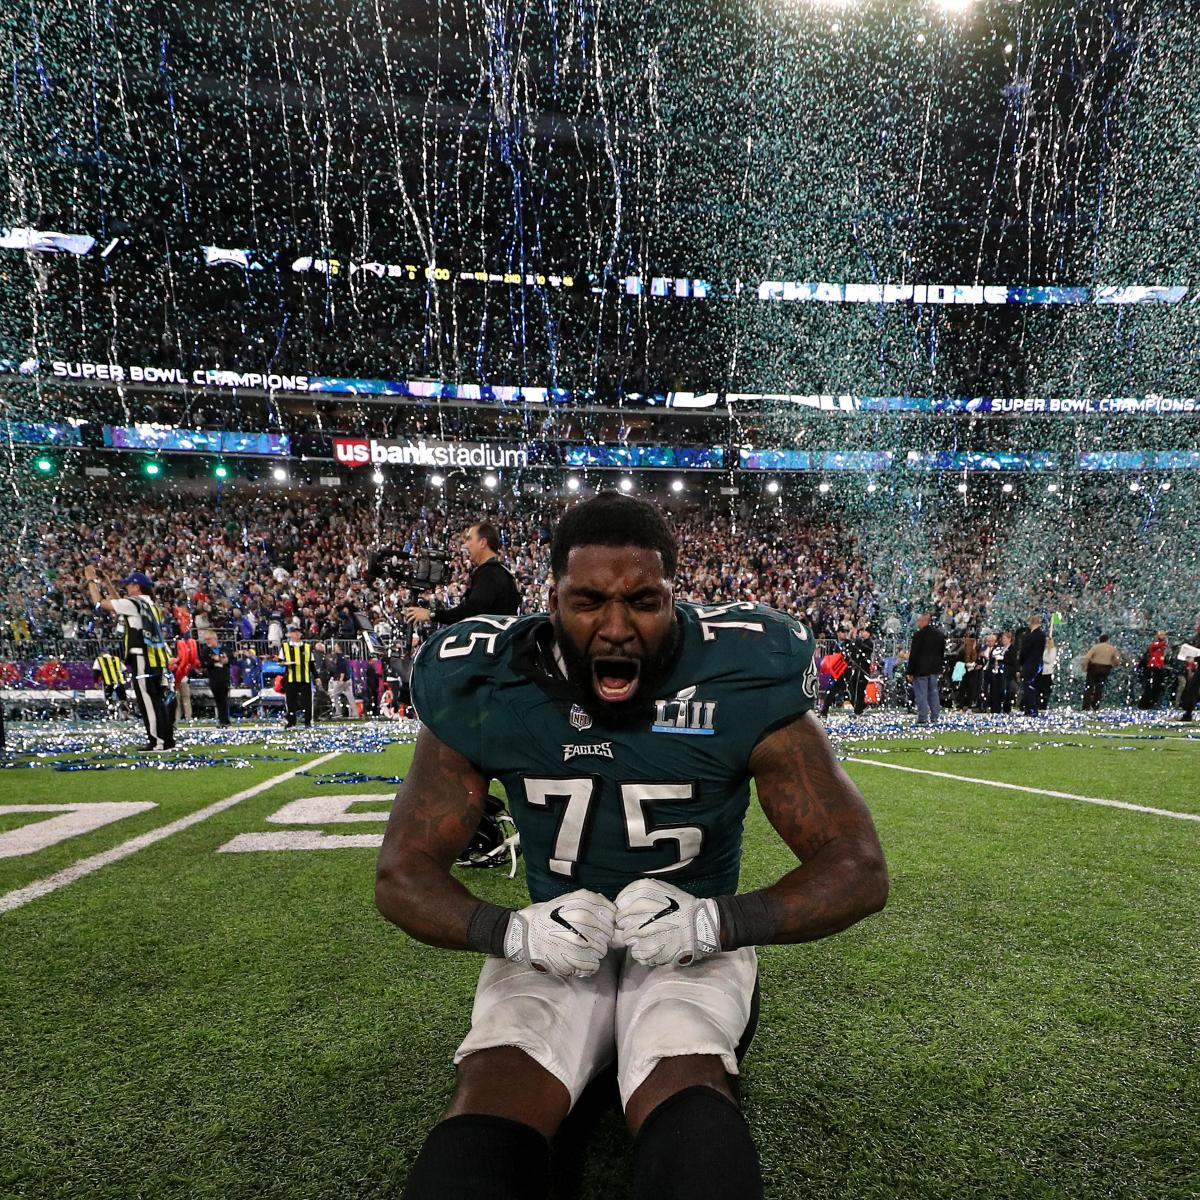 eagles to the super bowl